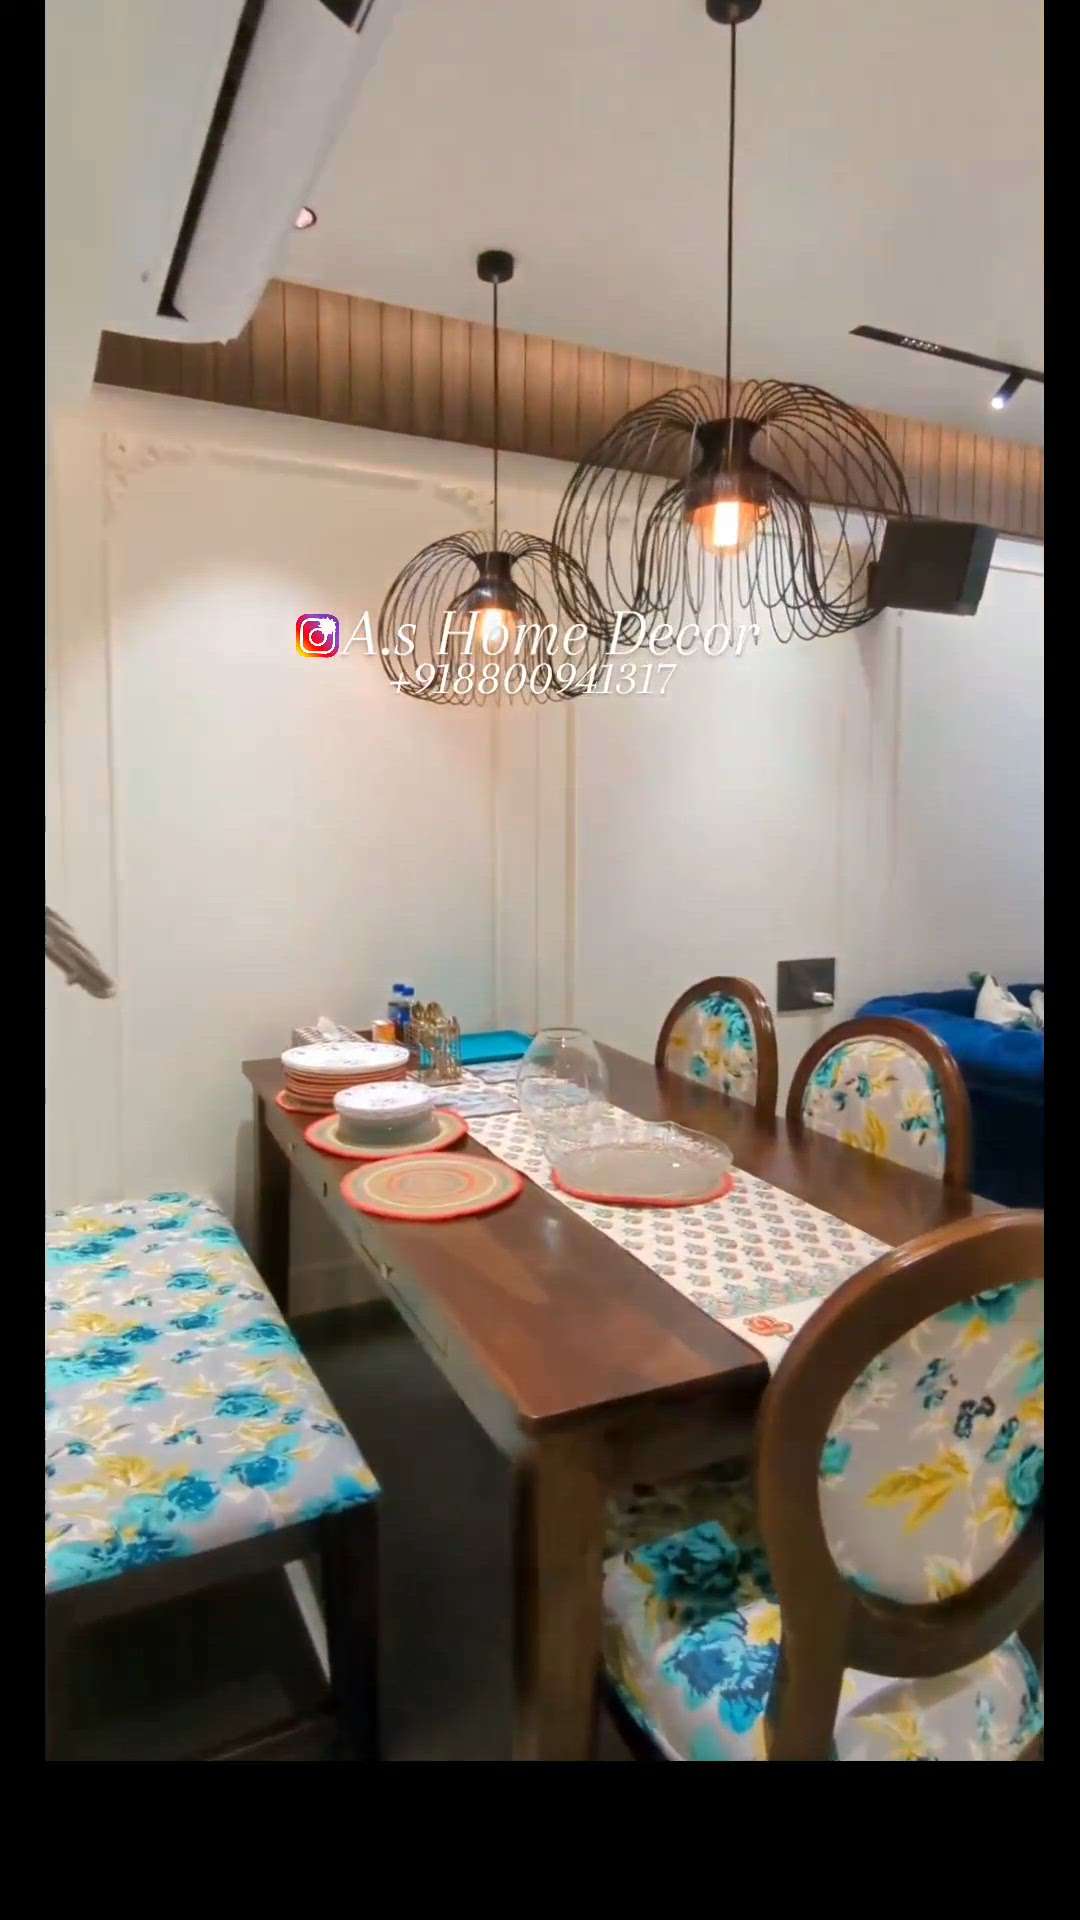 3BHk Interior Complete Site. by A.s Home Decor... 
Contact Us +918800941317
for. your dream home interior. In your budget 
 #ashomedecor  #Architect  #koloapp  #viralvideo  #LivingroomDesigns  #BedroomDecor  #BedroomDesigns  #InteriorDesigner  #LivingRoomSofa  #Contractor  #woodworkersofinstagram